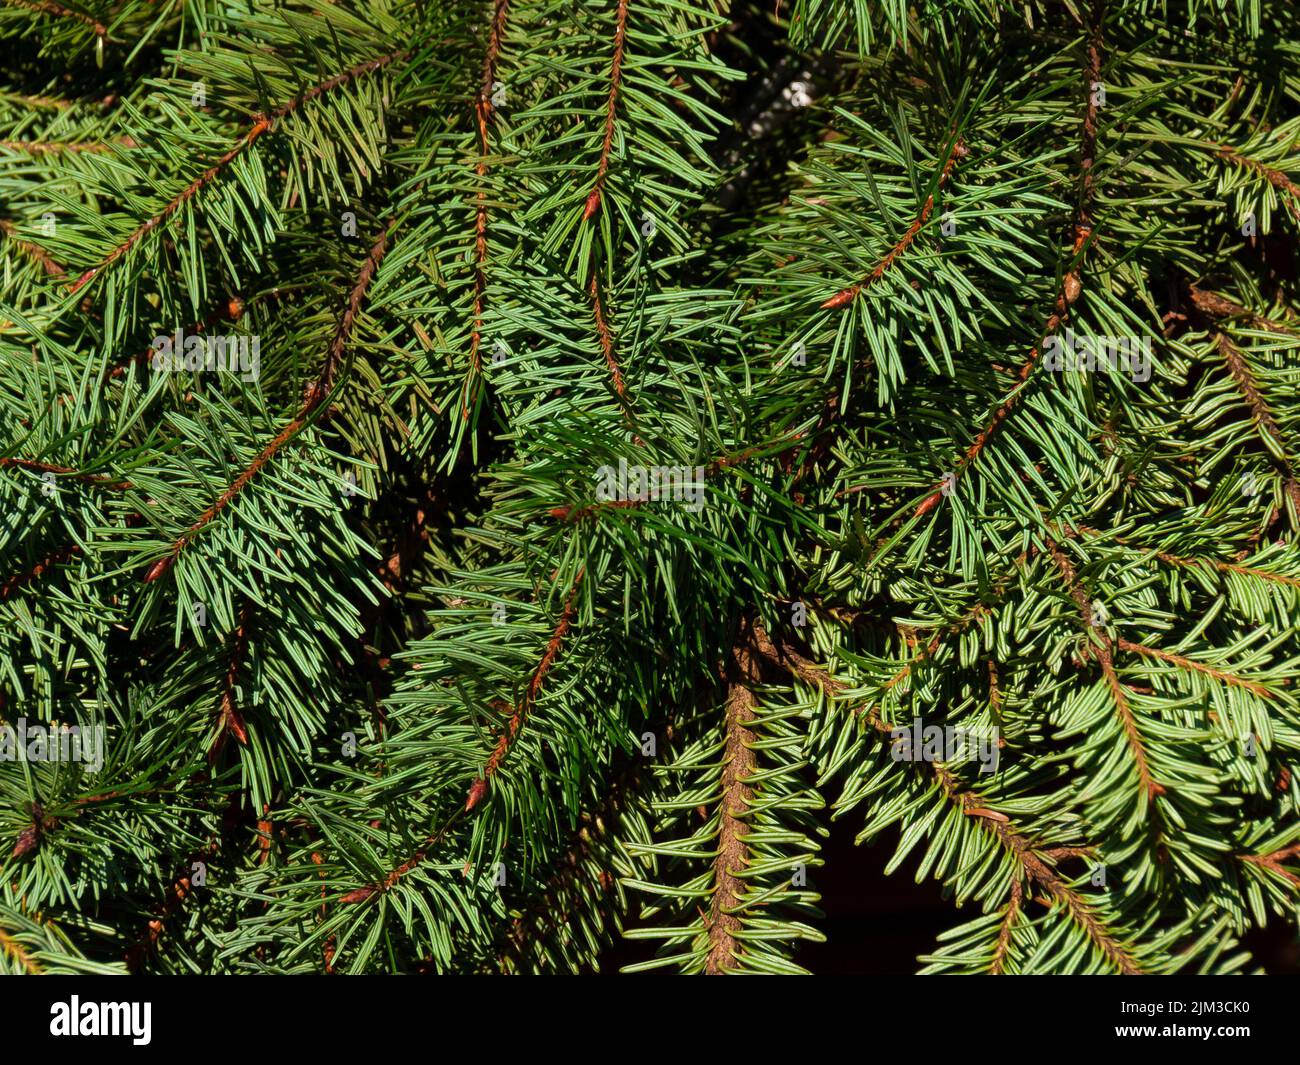 Fir green needle leaves as natural background Stock Photo